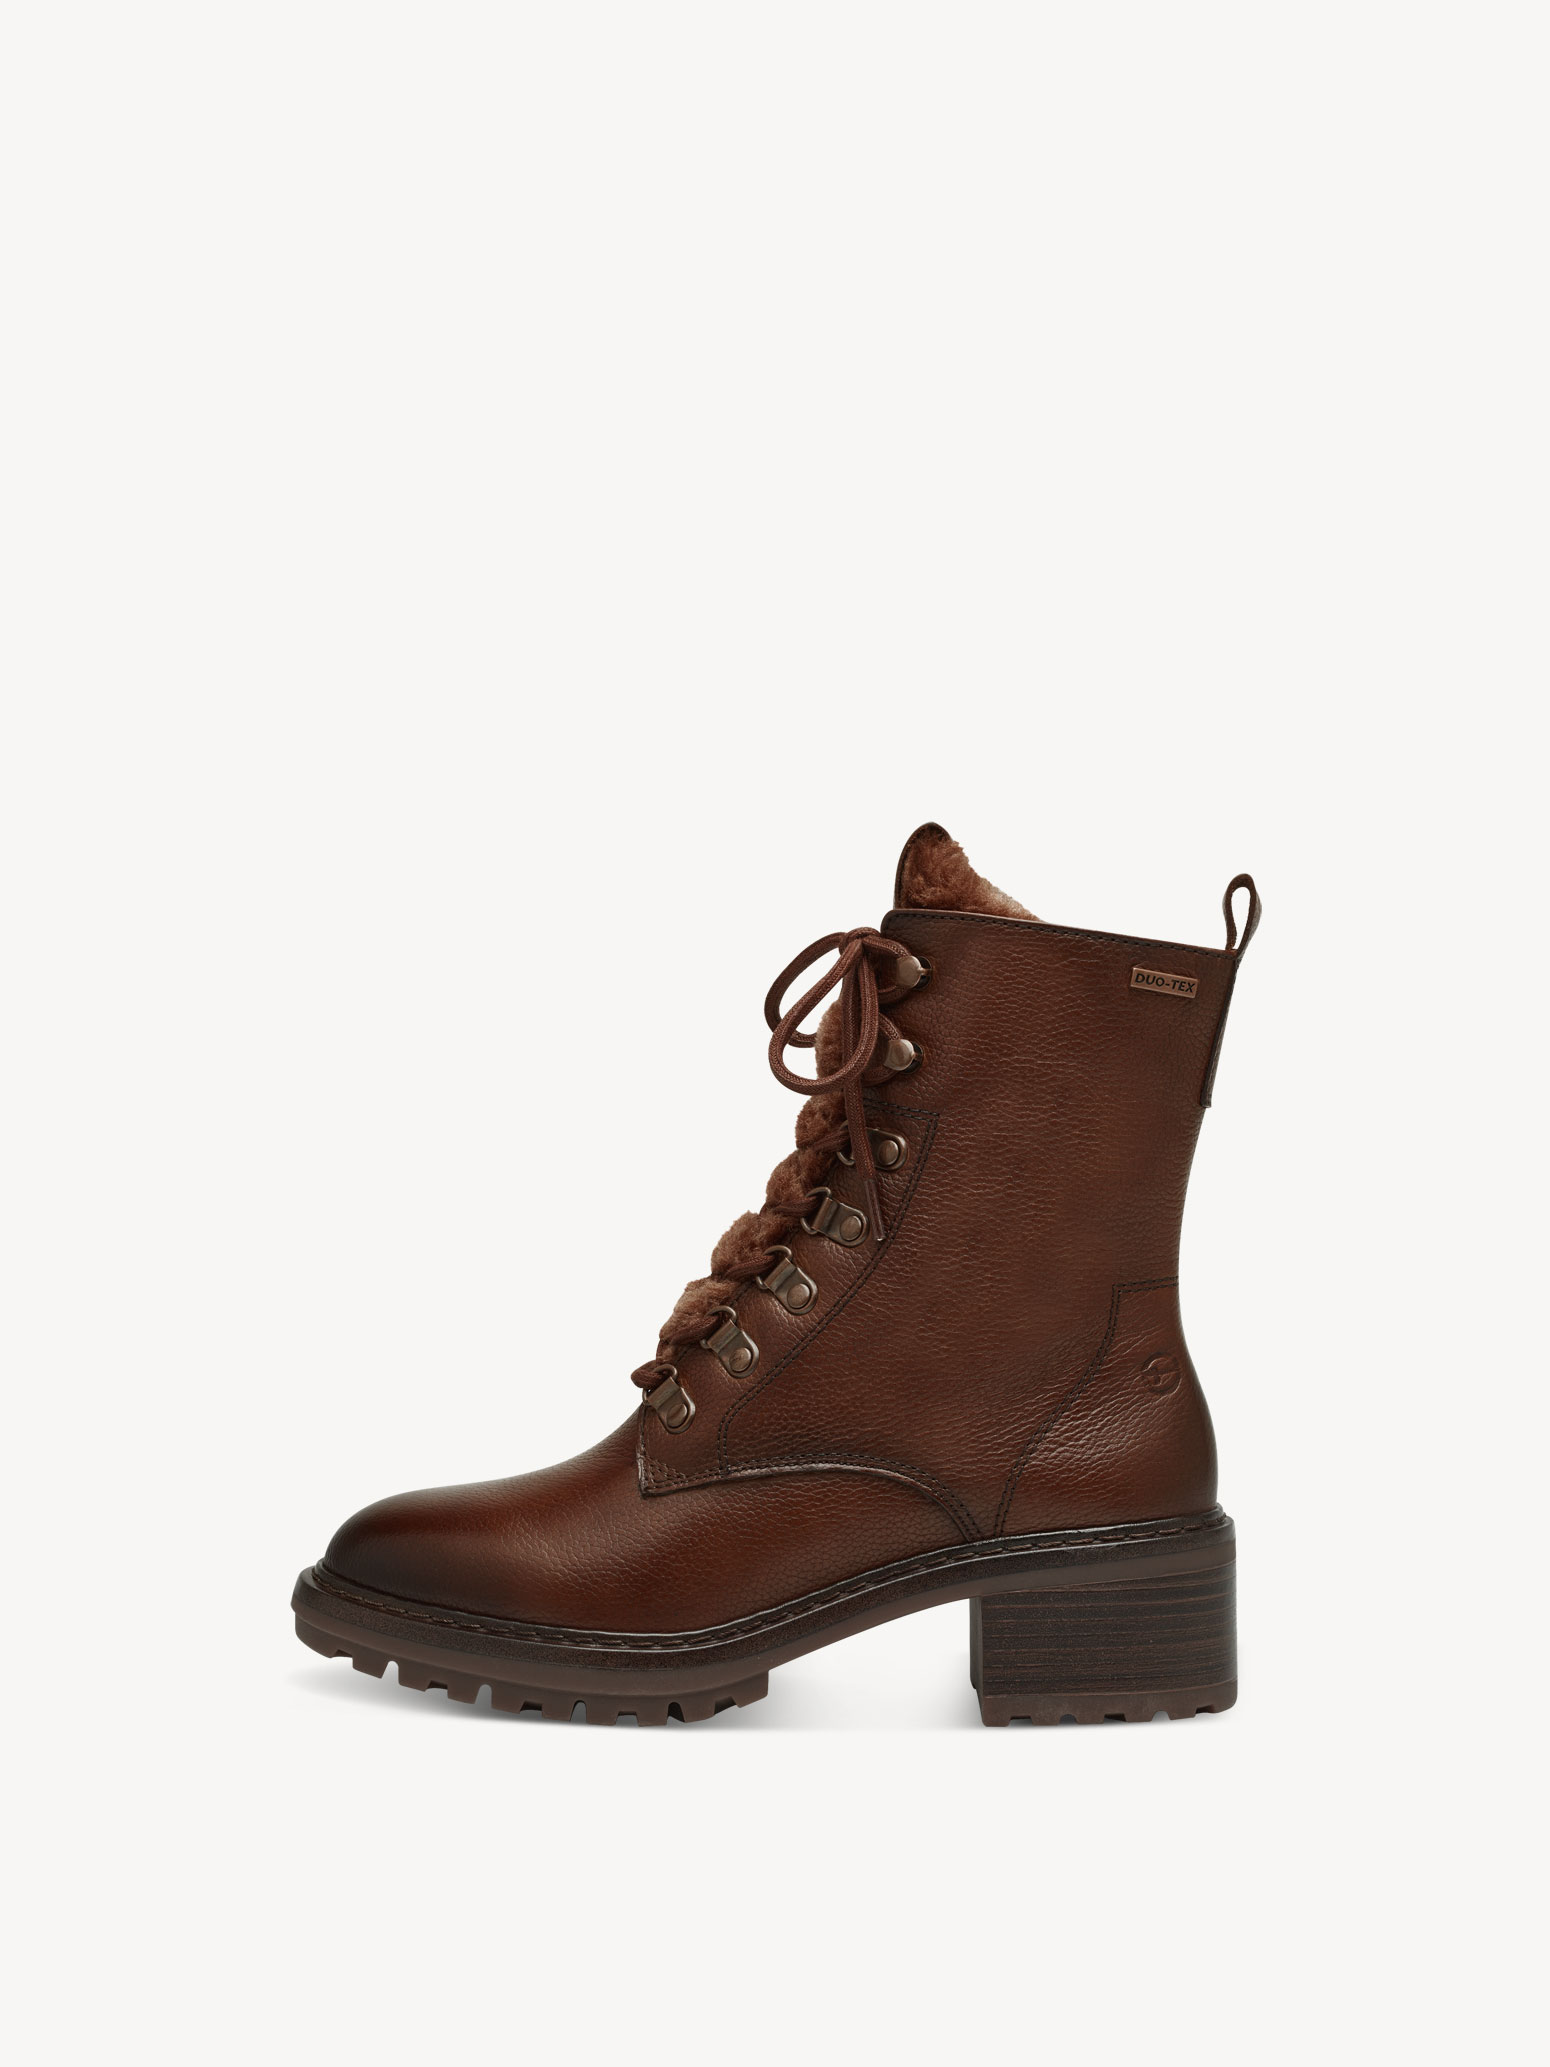 Leather Bootie - brown warm lining